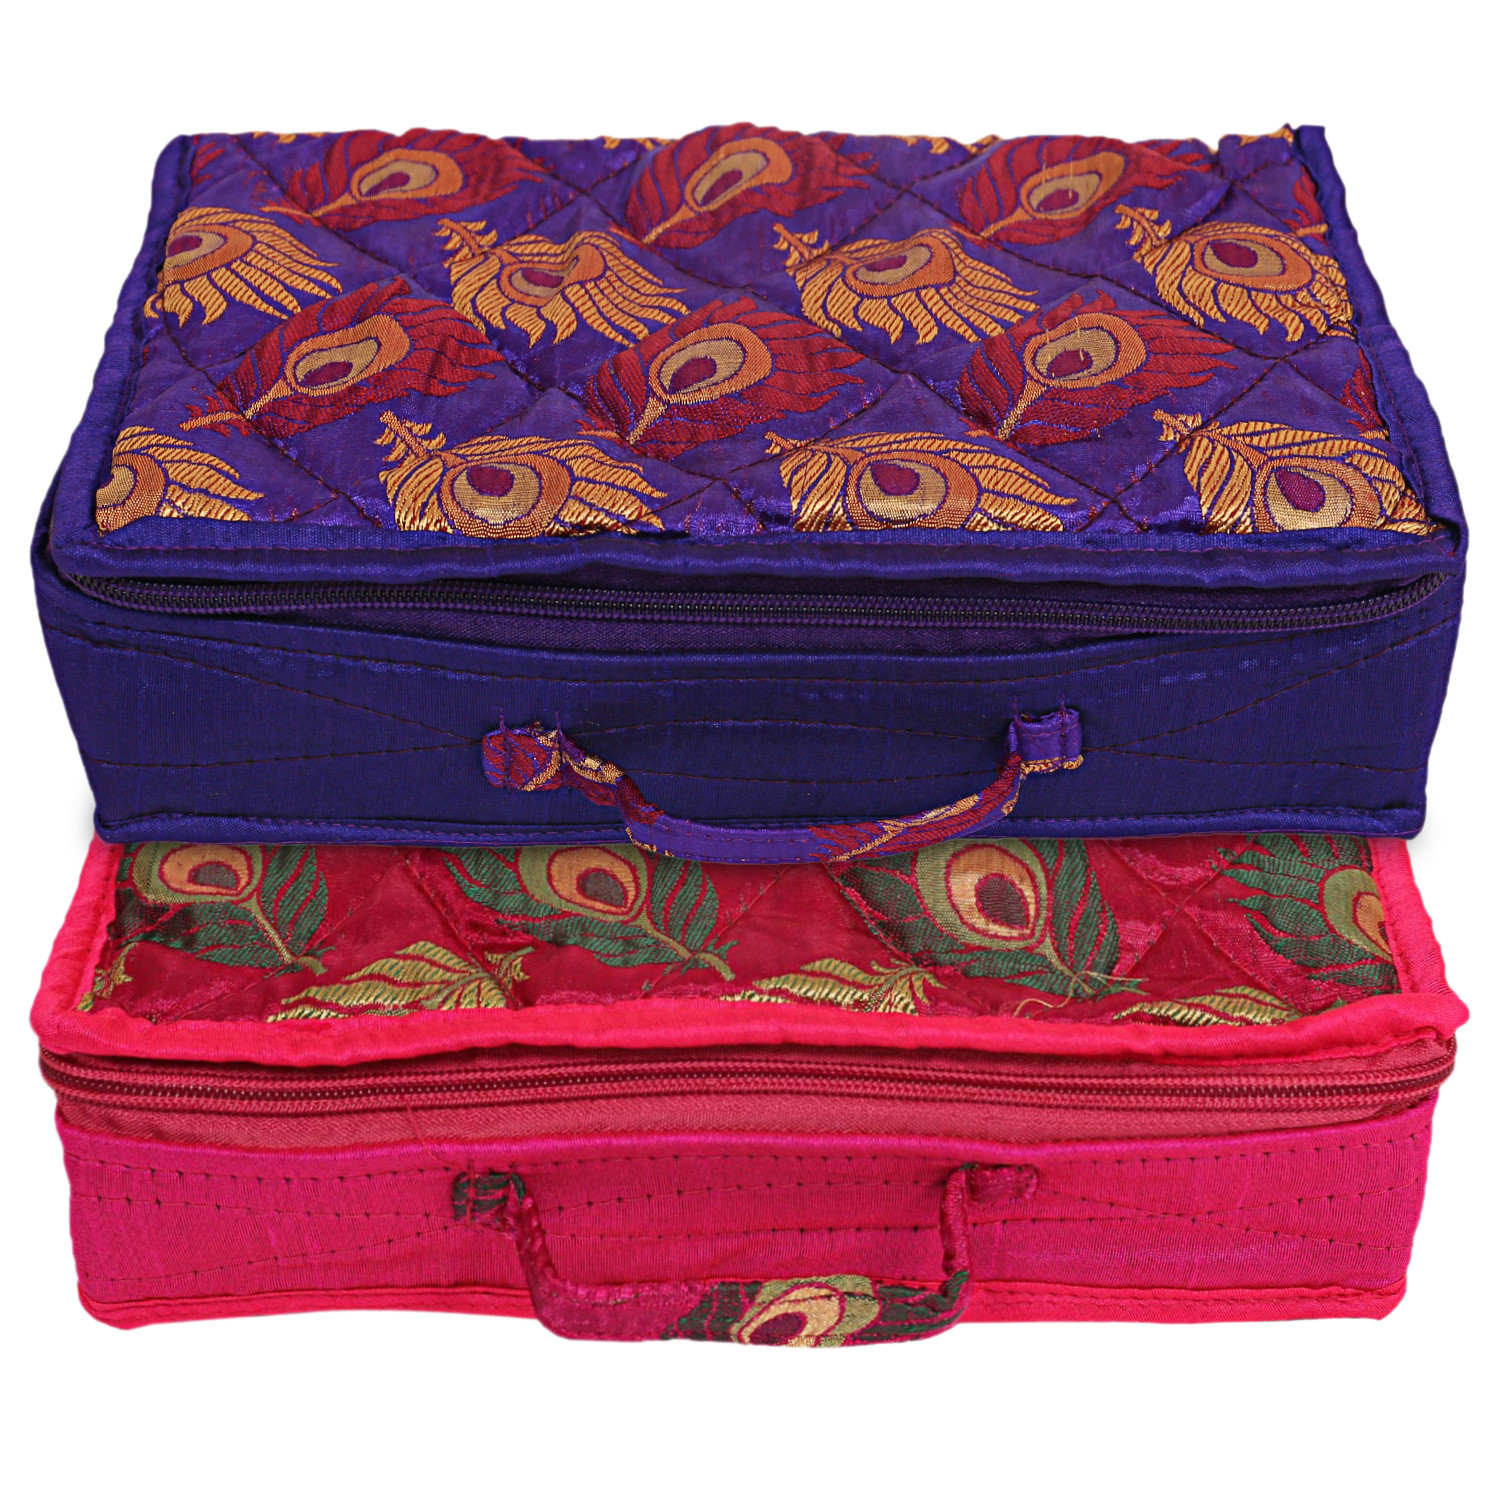 Kuber Industries Feather Print Satin Jewellery Organizer For Small Jewellery With 4 Pouches Pack Of 2 (Pink and Purple) 54KM4064